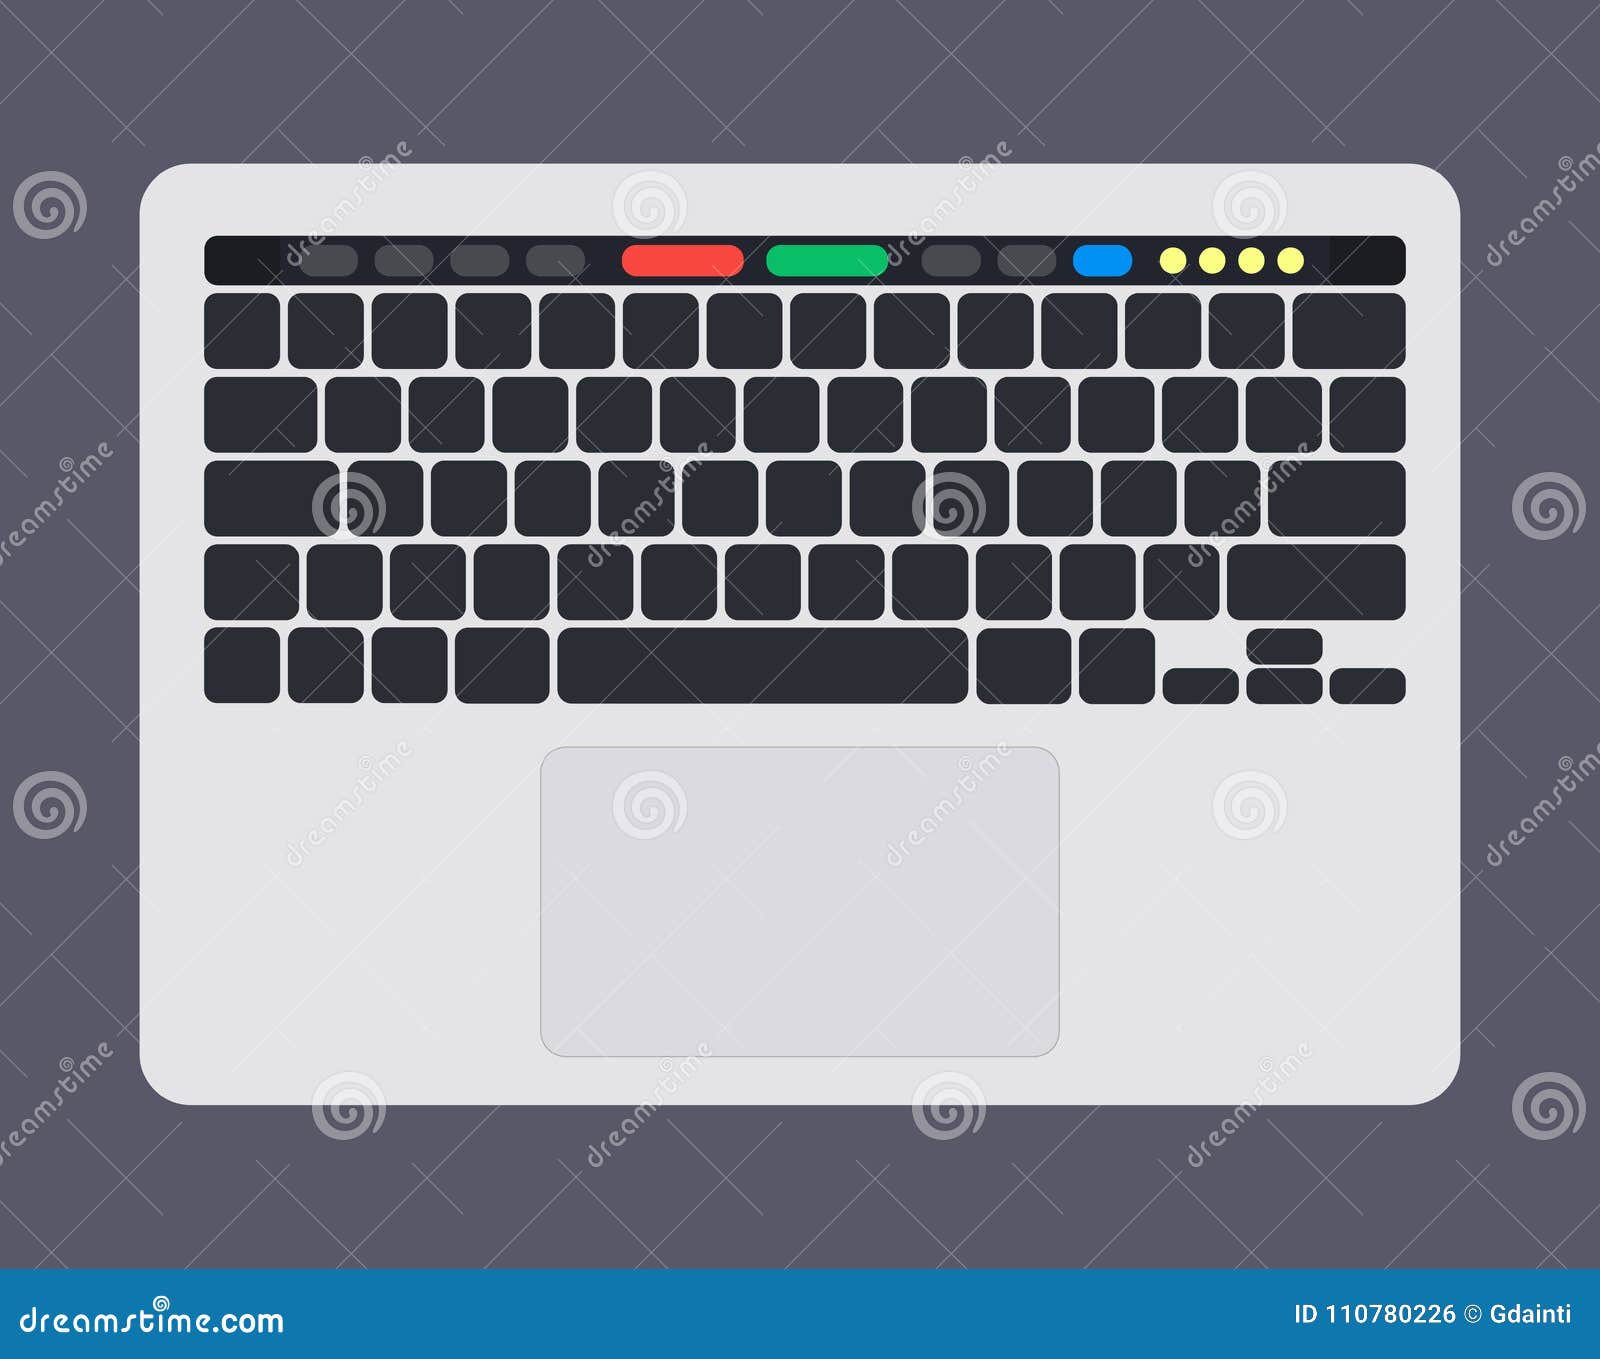 modern laptop computer keyboard with blank bkack keyboard keys, touch panel and touchpad